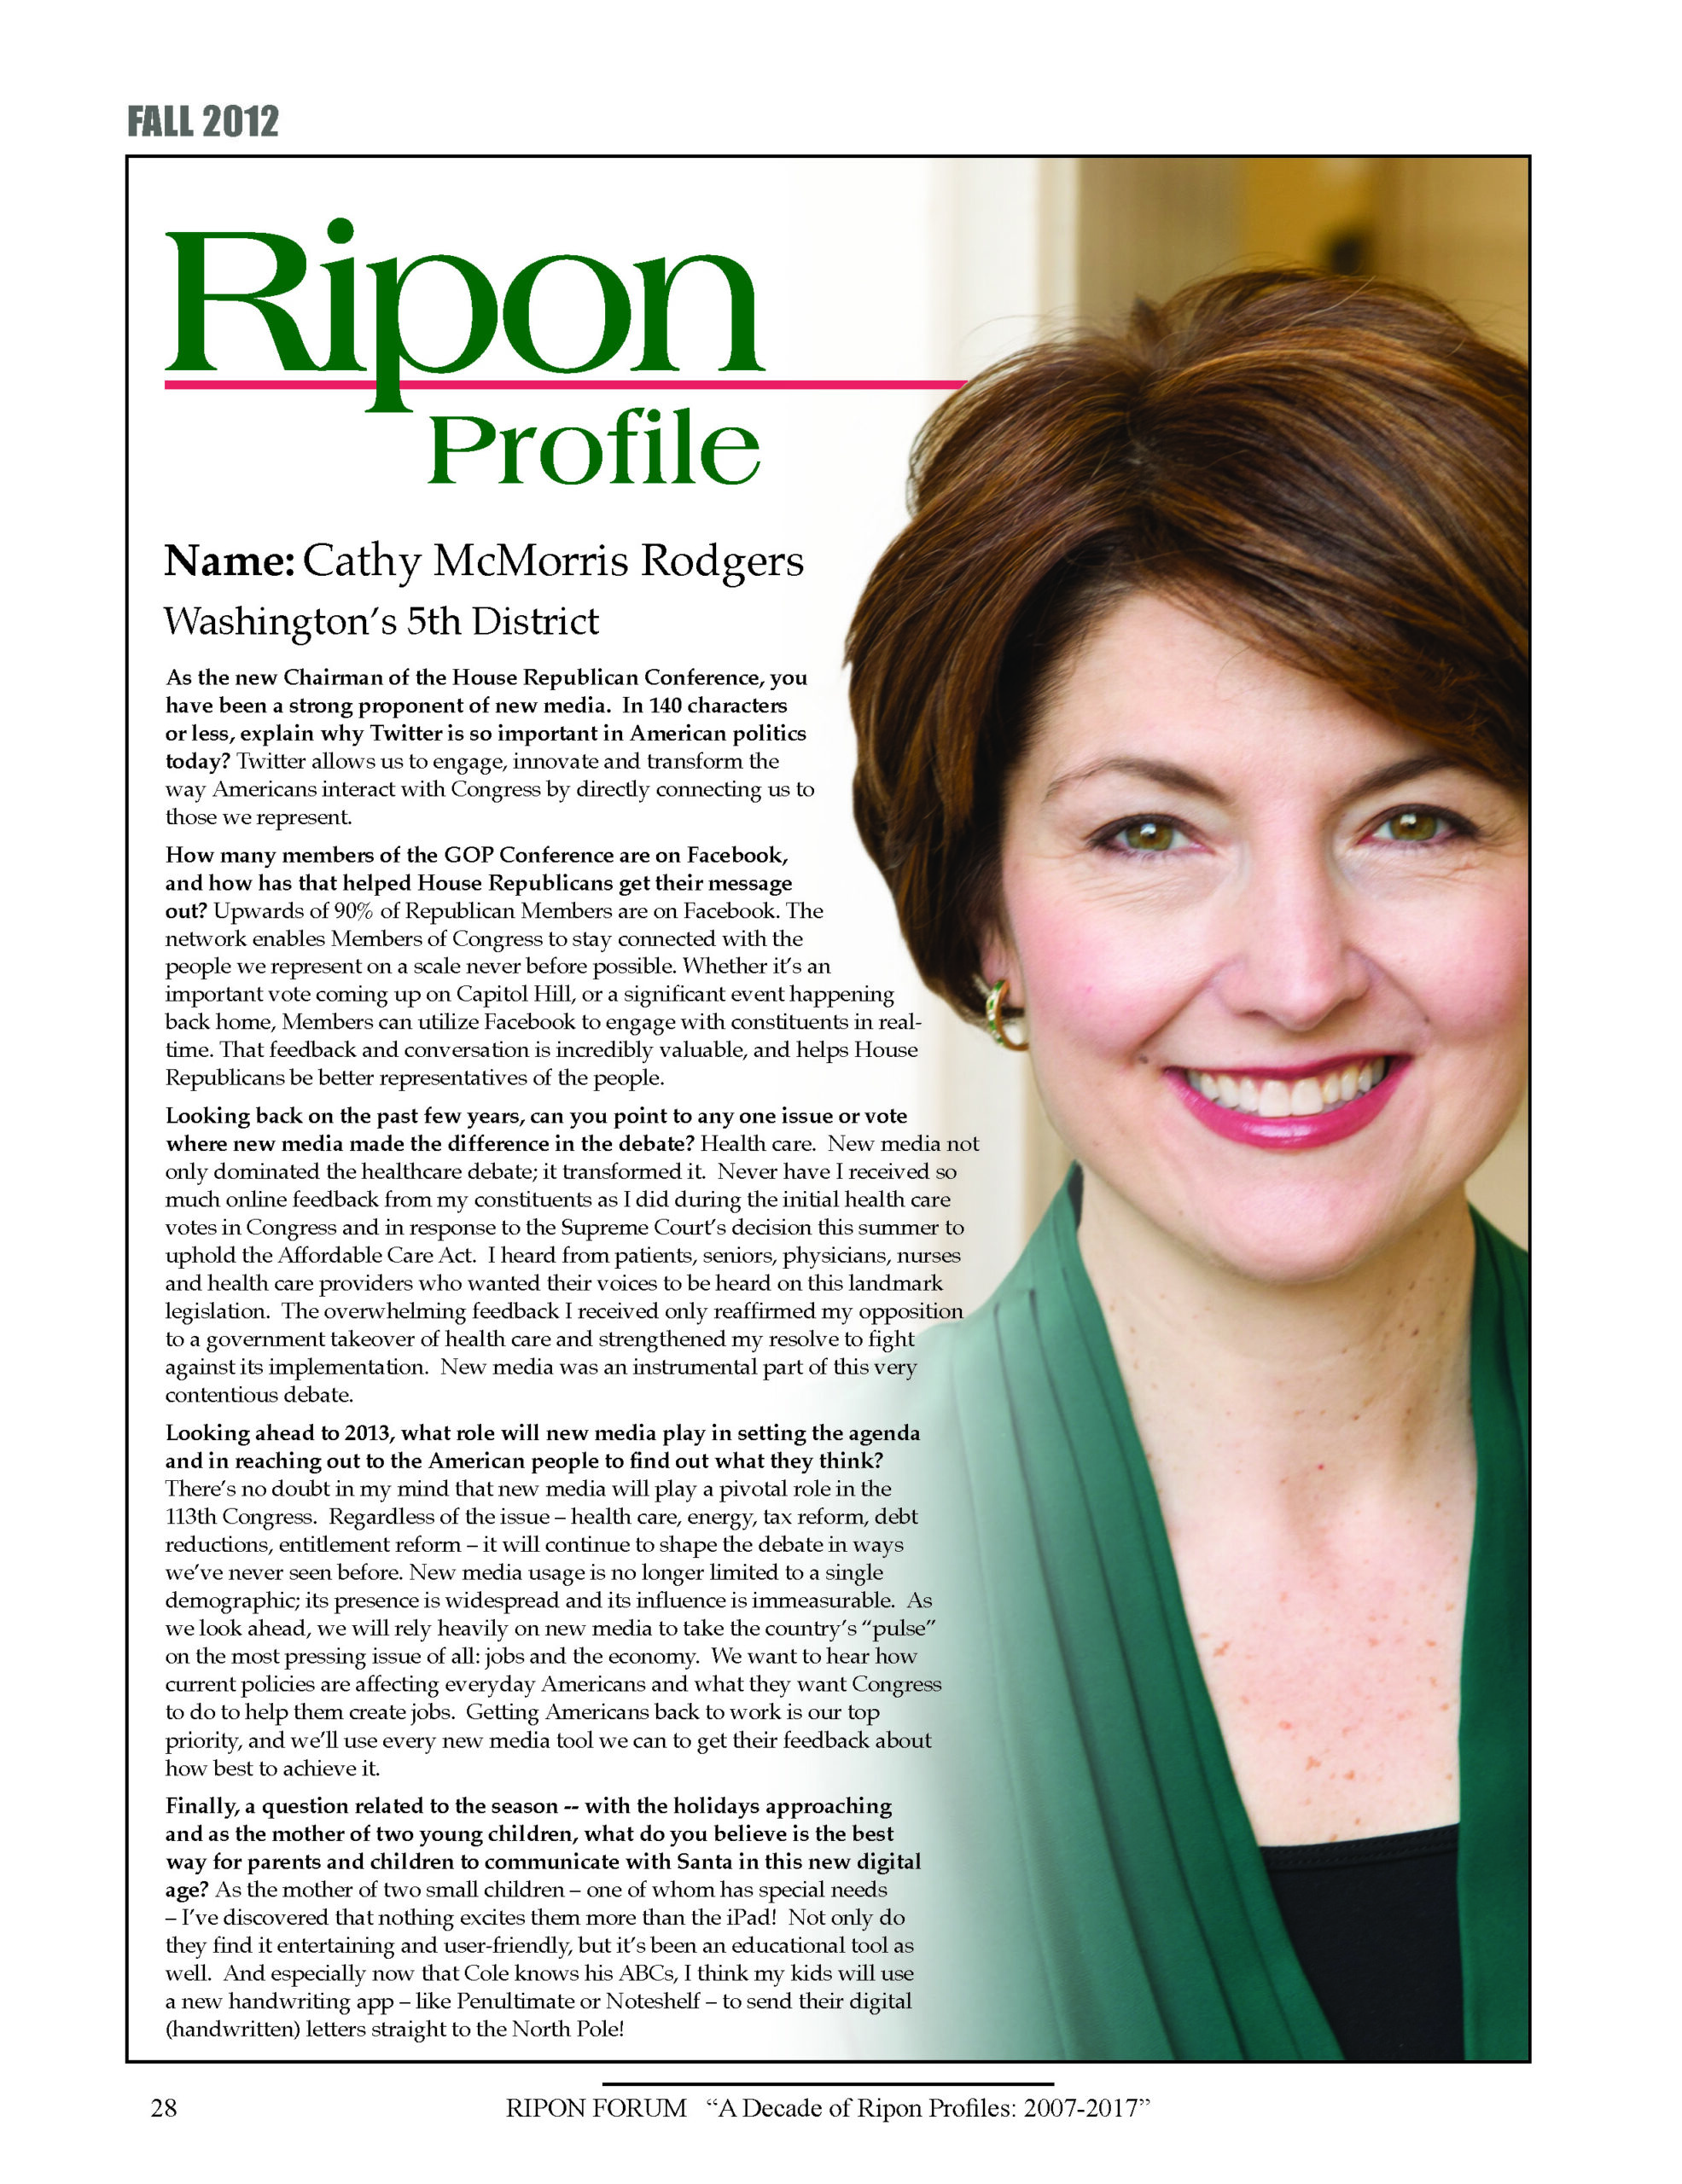 Ripon Profile of Cathy McMorris Rodgers